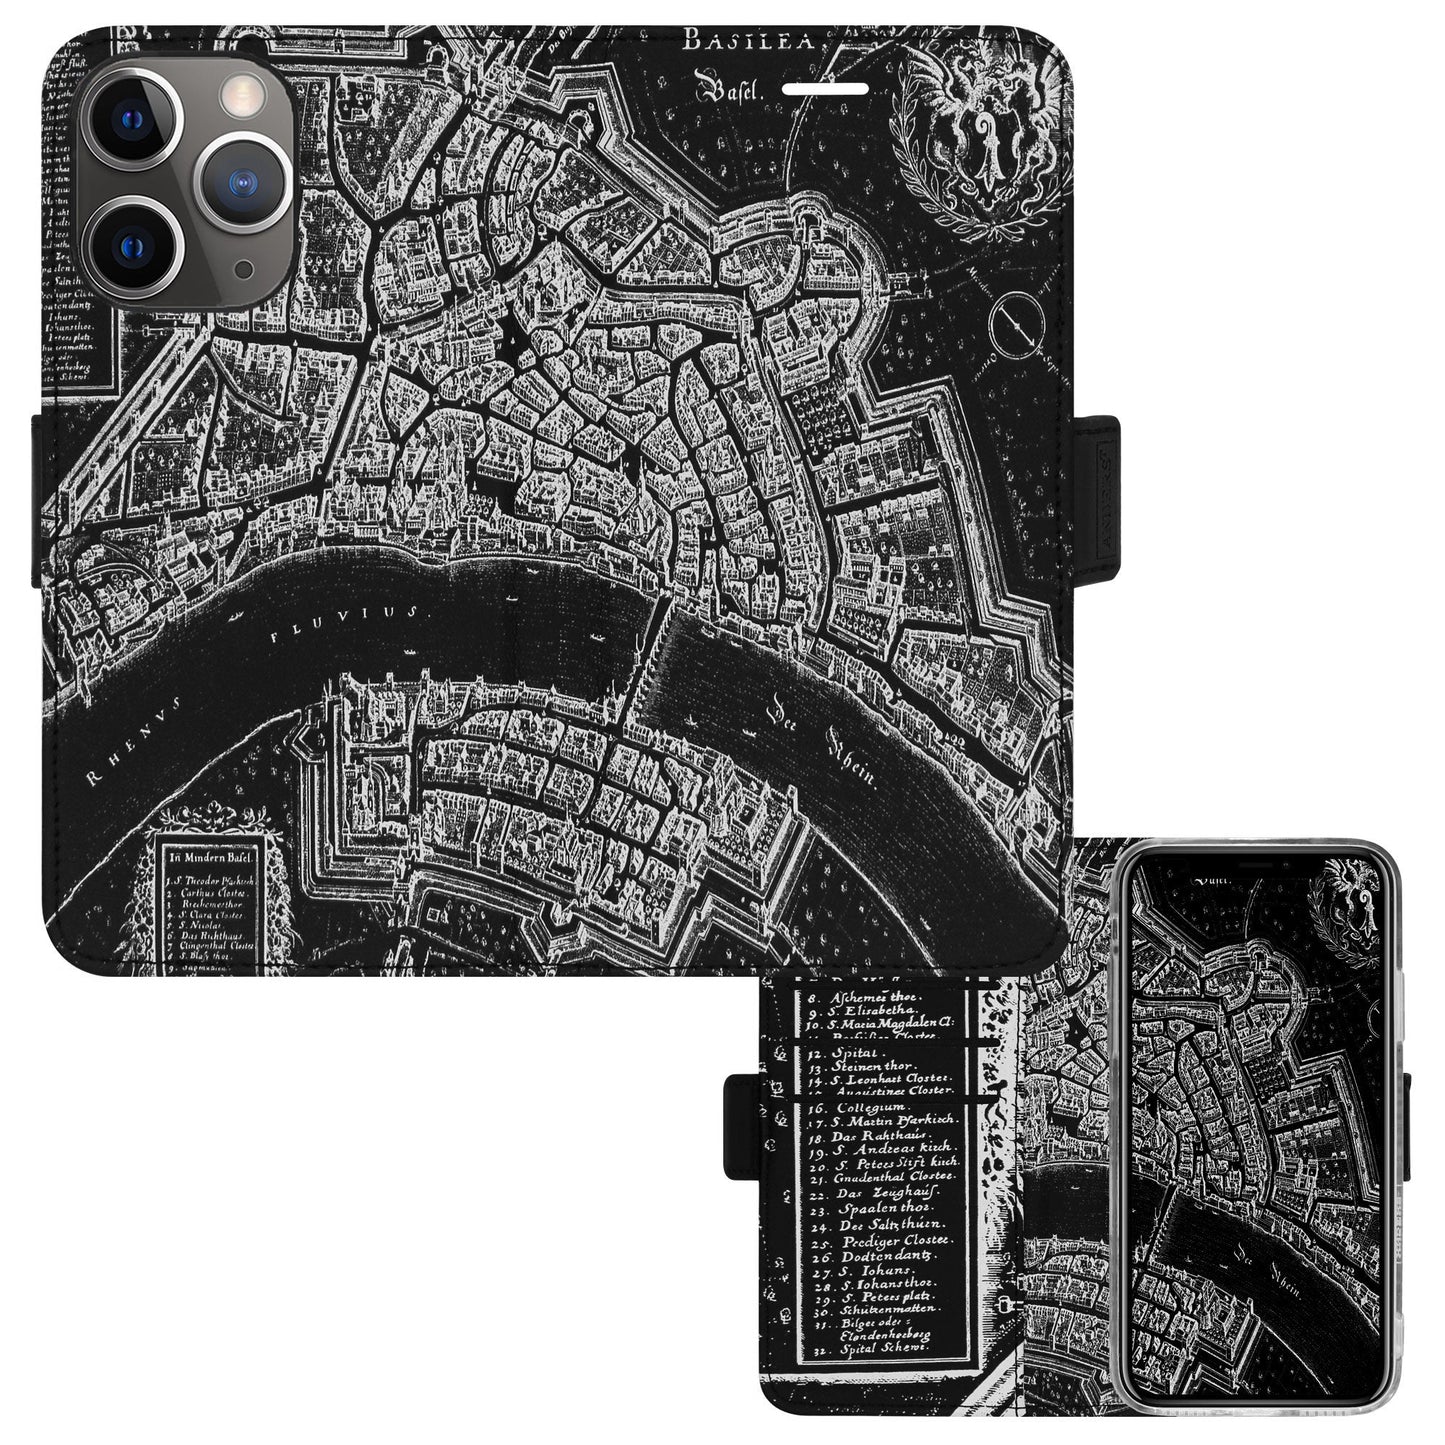 Basel Merian Negative Victor Case for iPhone 11 Pro